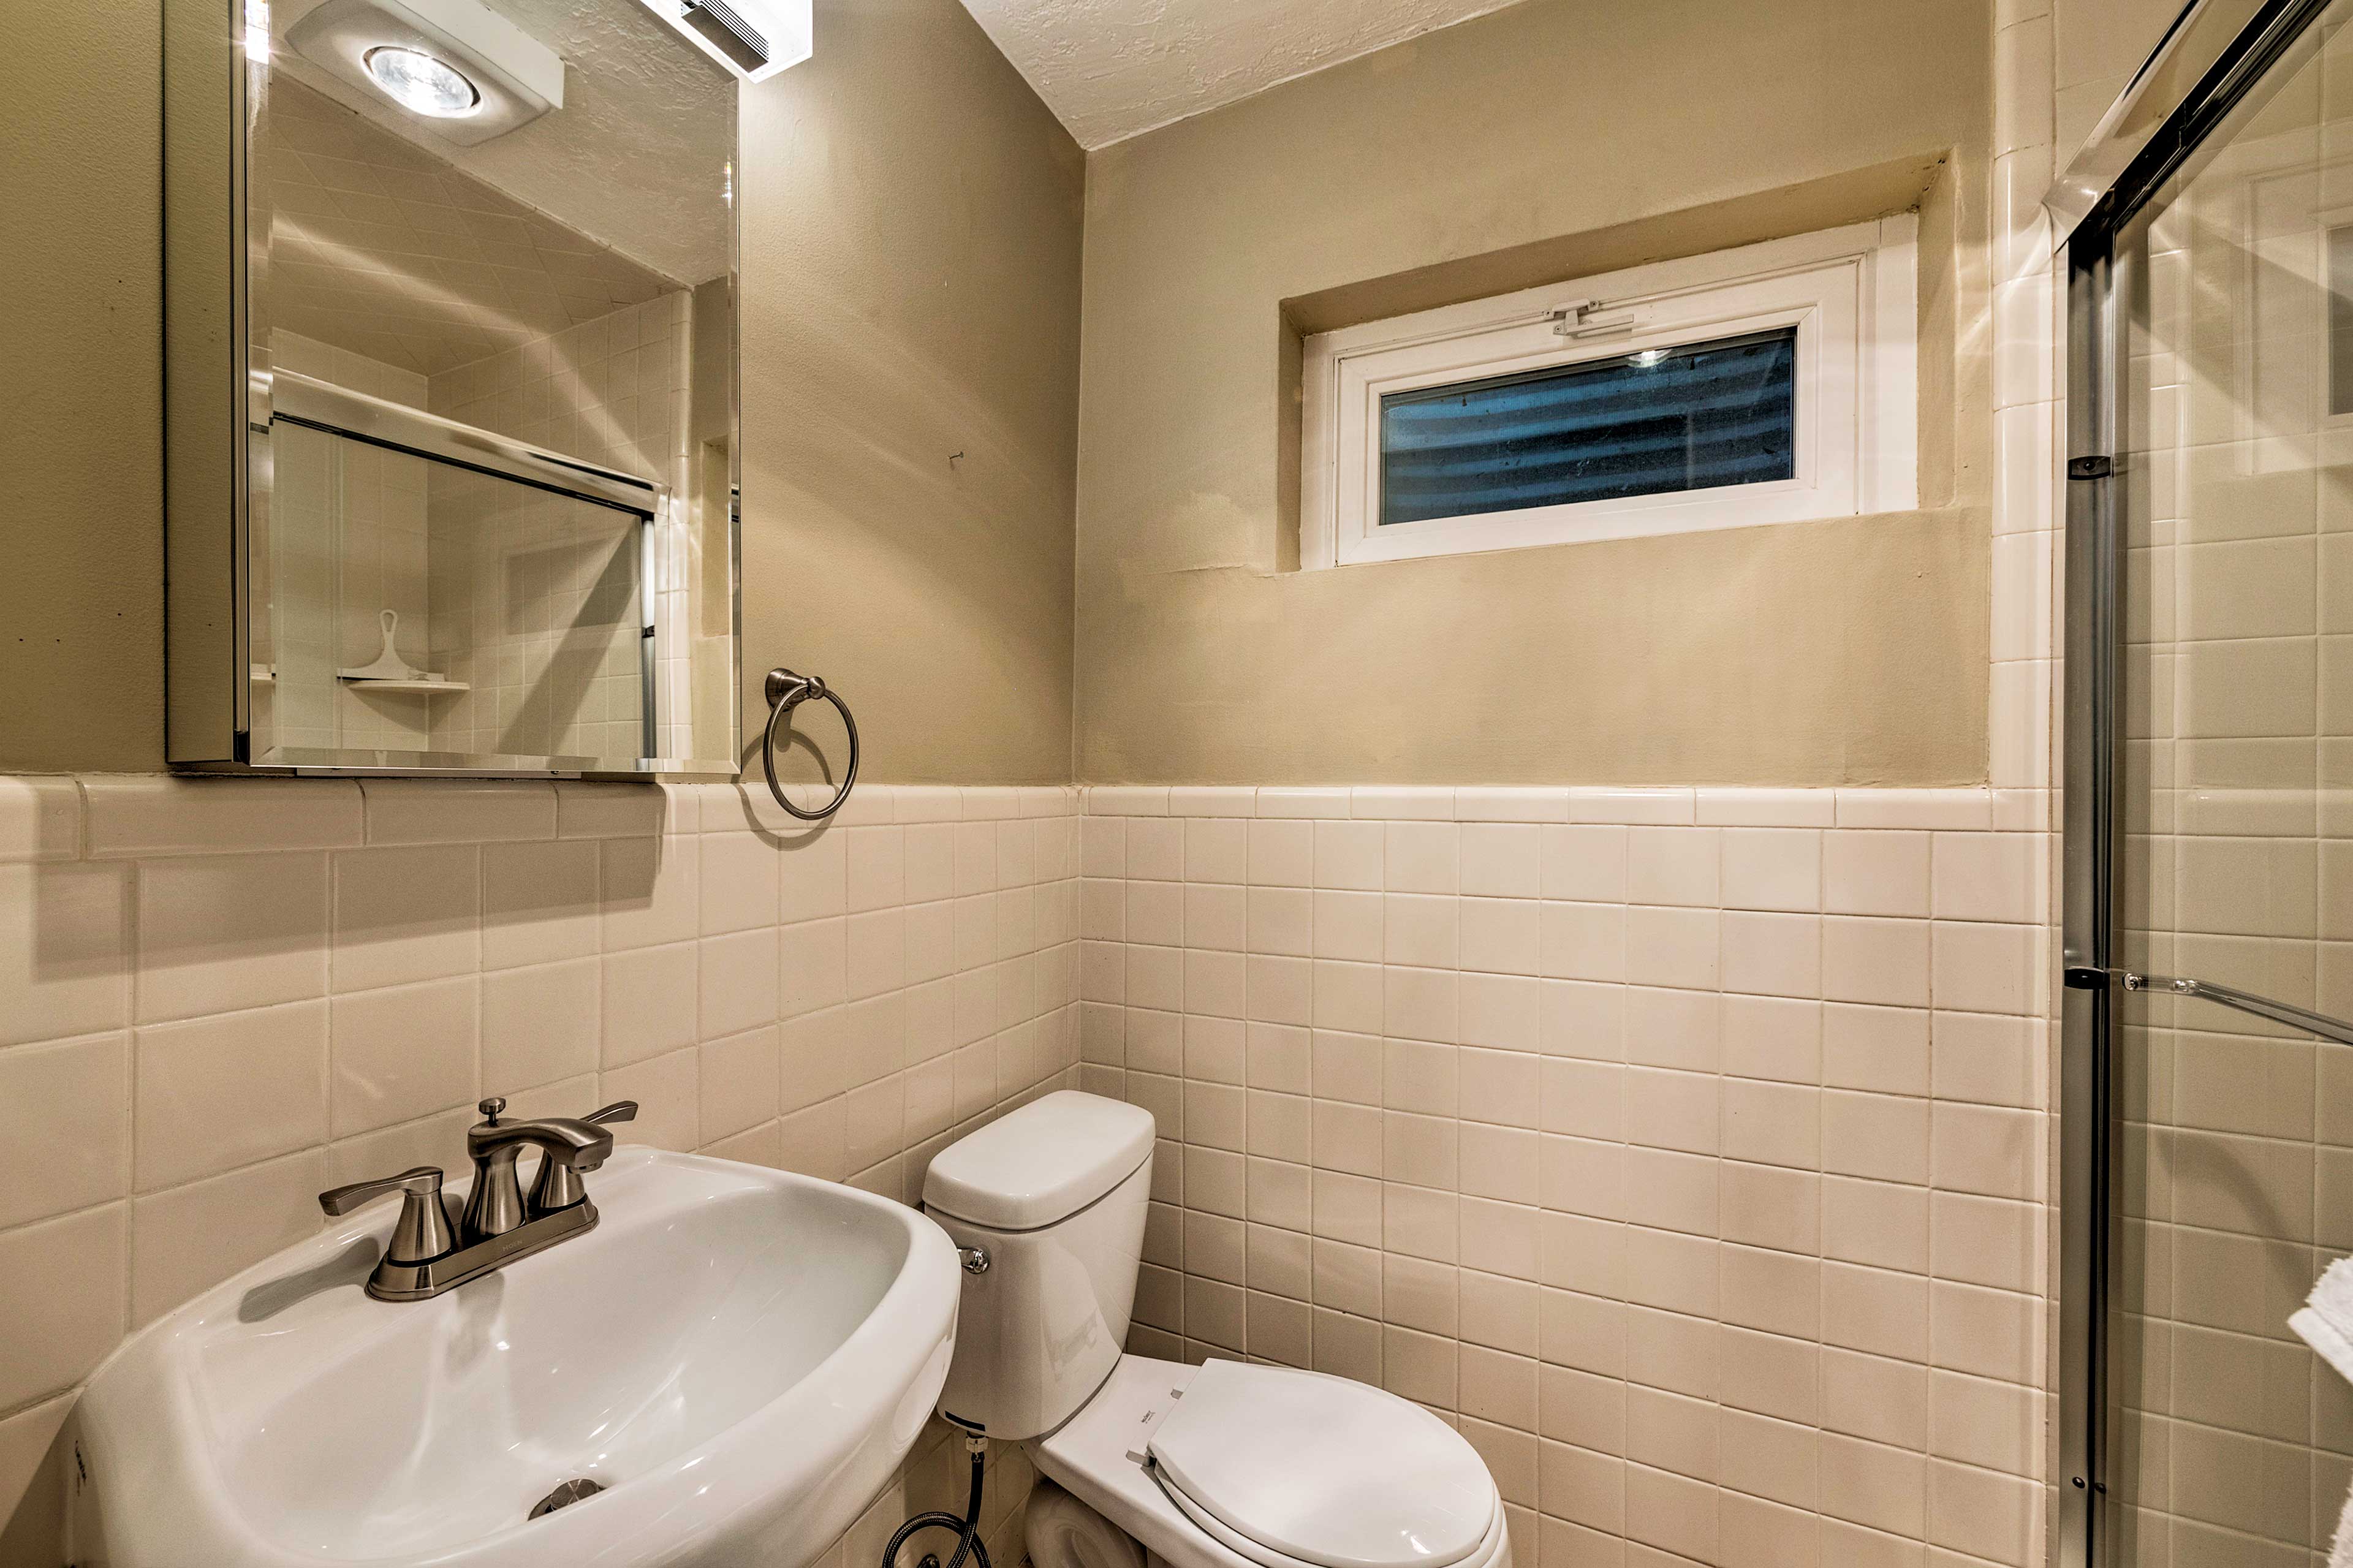 This full bathroom hosts a single vanity and walk-in shower.